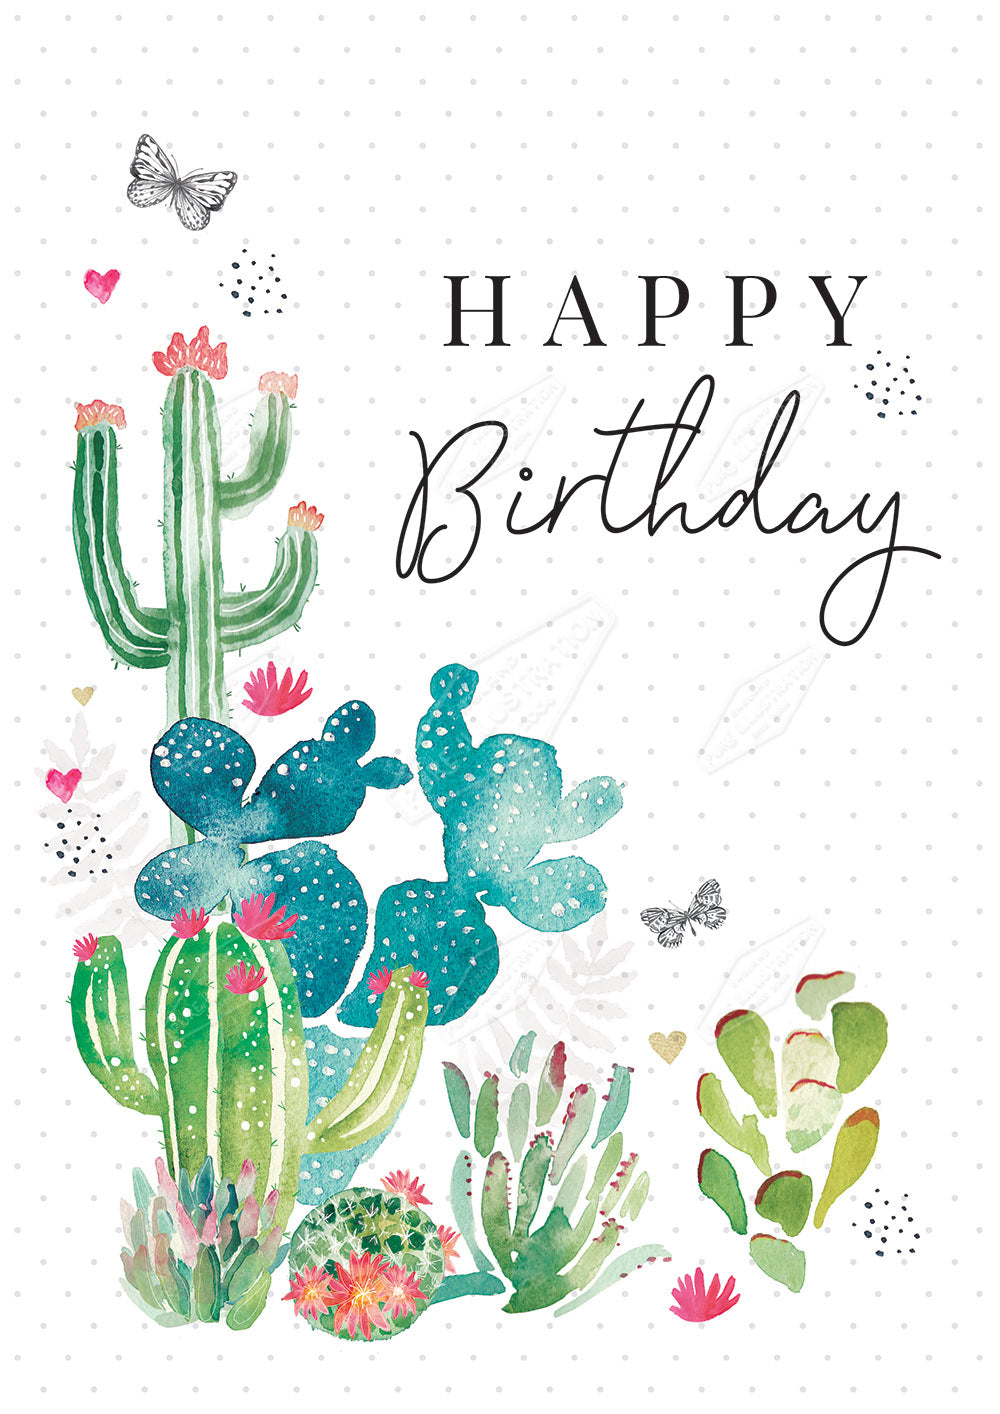 00028703EST- Emily Stalley is represented by Pure Art Licensing Agency - Birthday Greeting Card Design